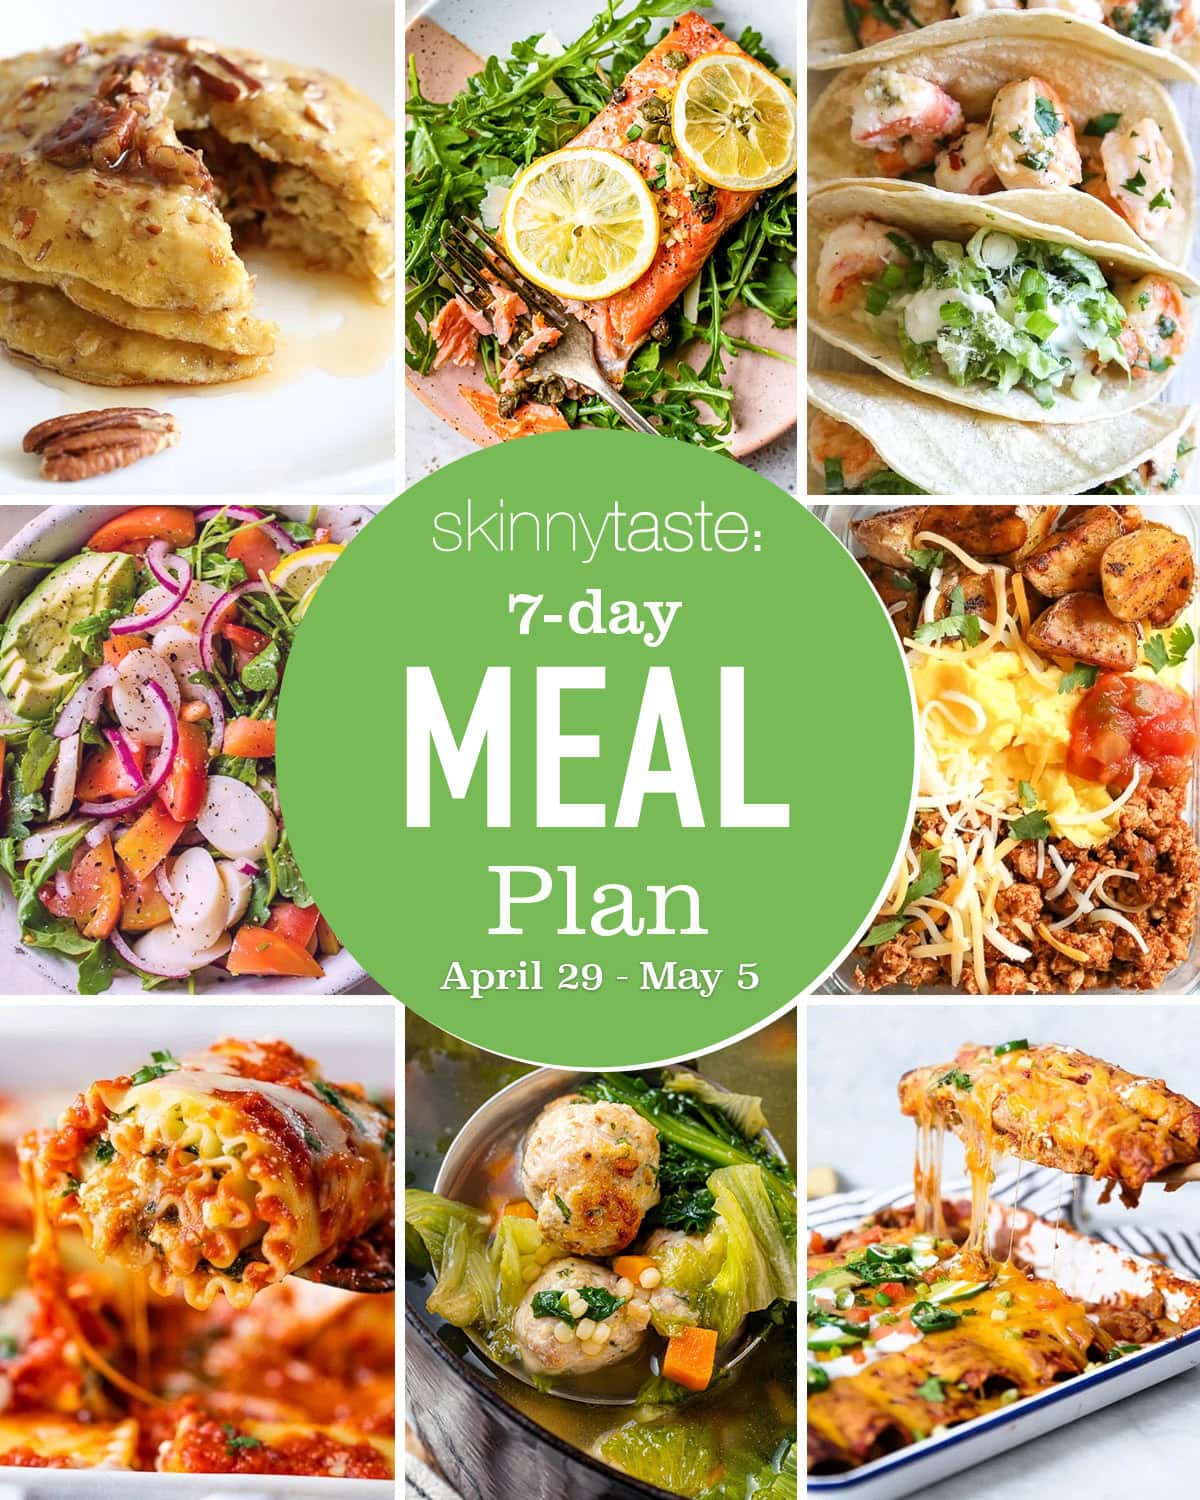 Free 7 Day Healthy Meal Plan (April 29-May 5)